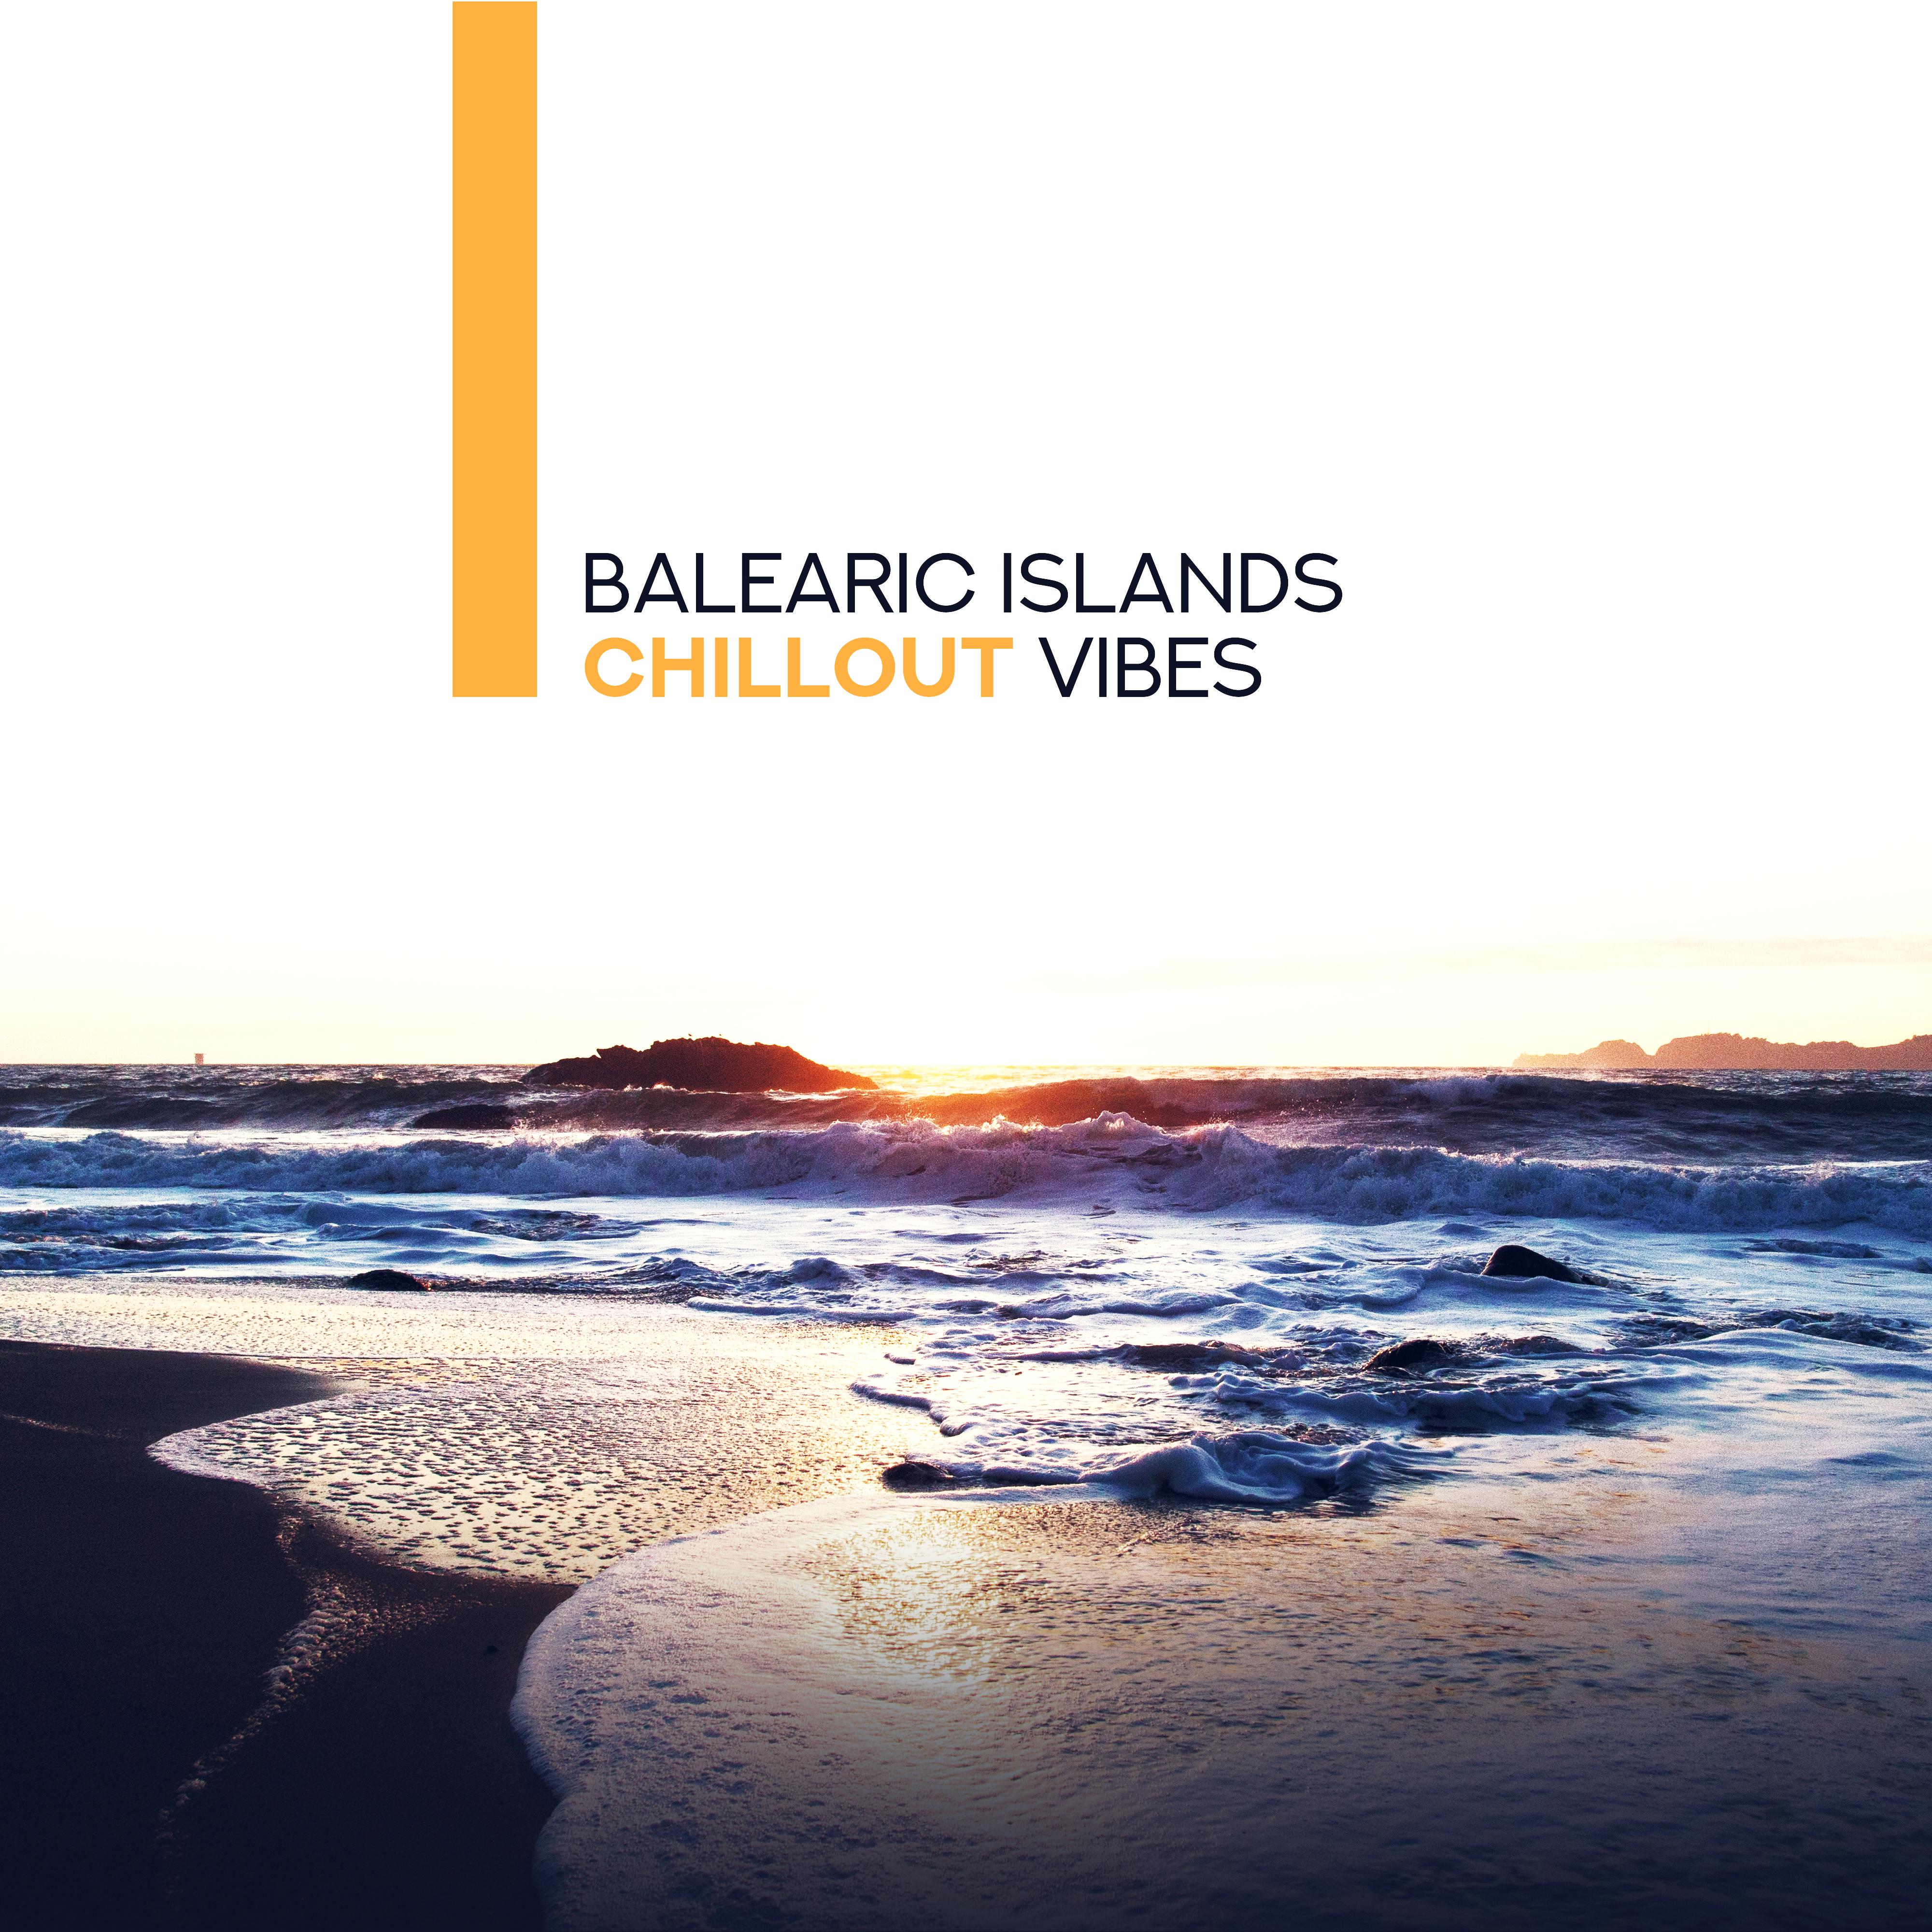 Balearic Islands Chillout Vibes